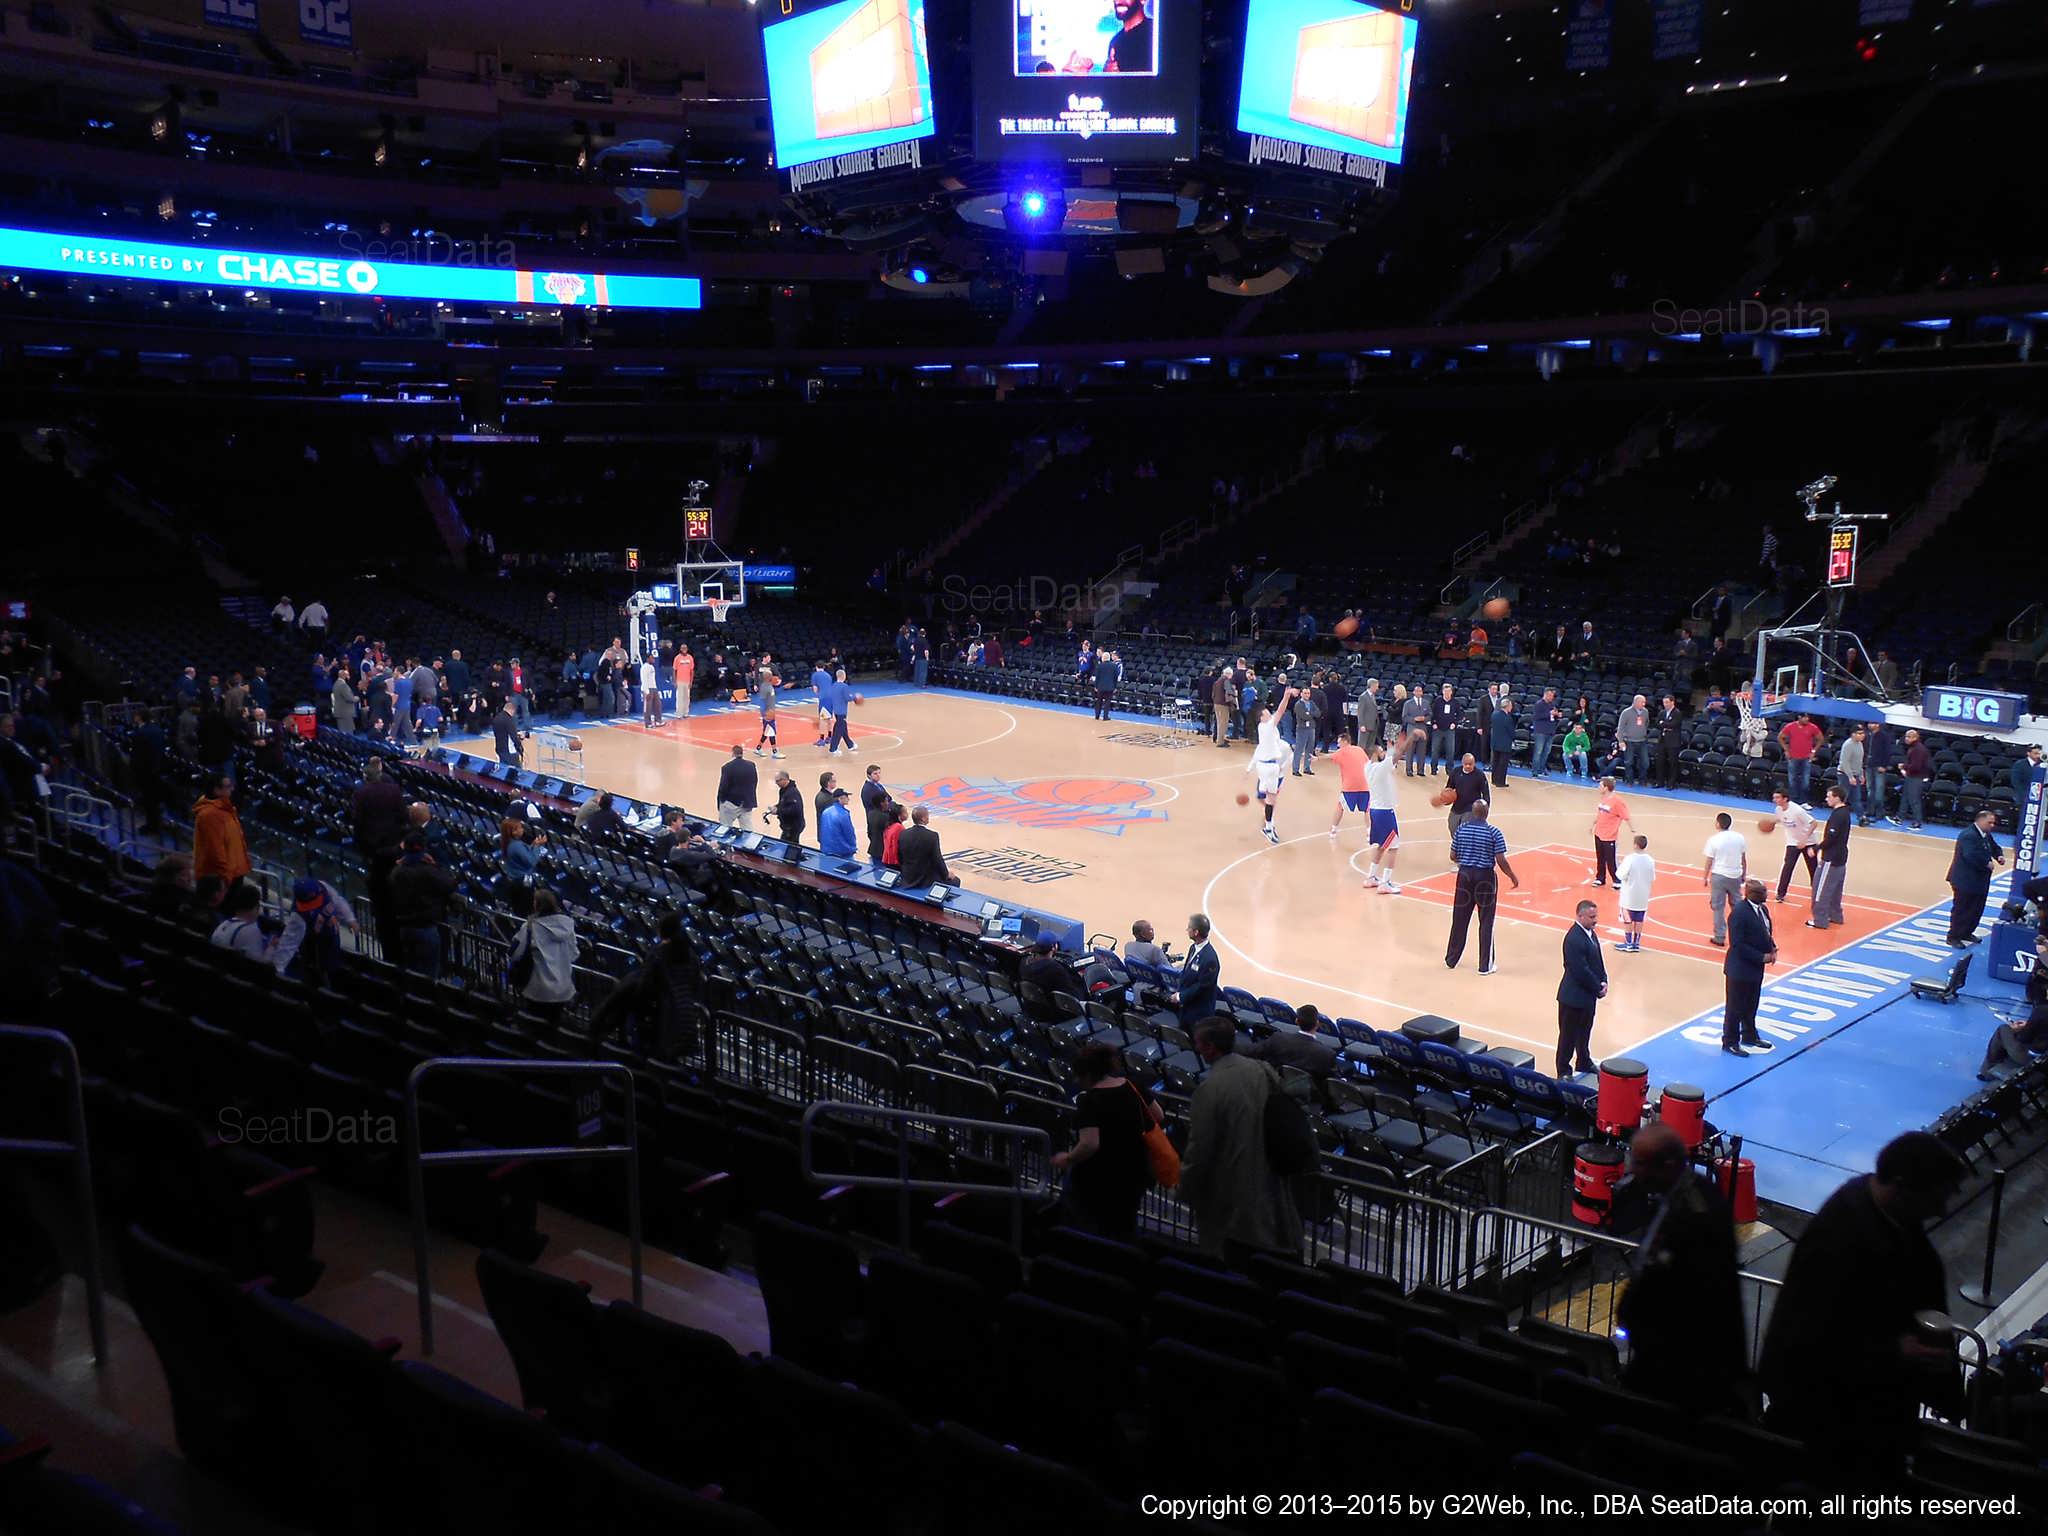 Seat view from section 109 at Madison Square Garden, home of the New York Knicks.